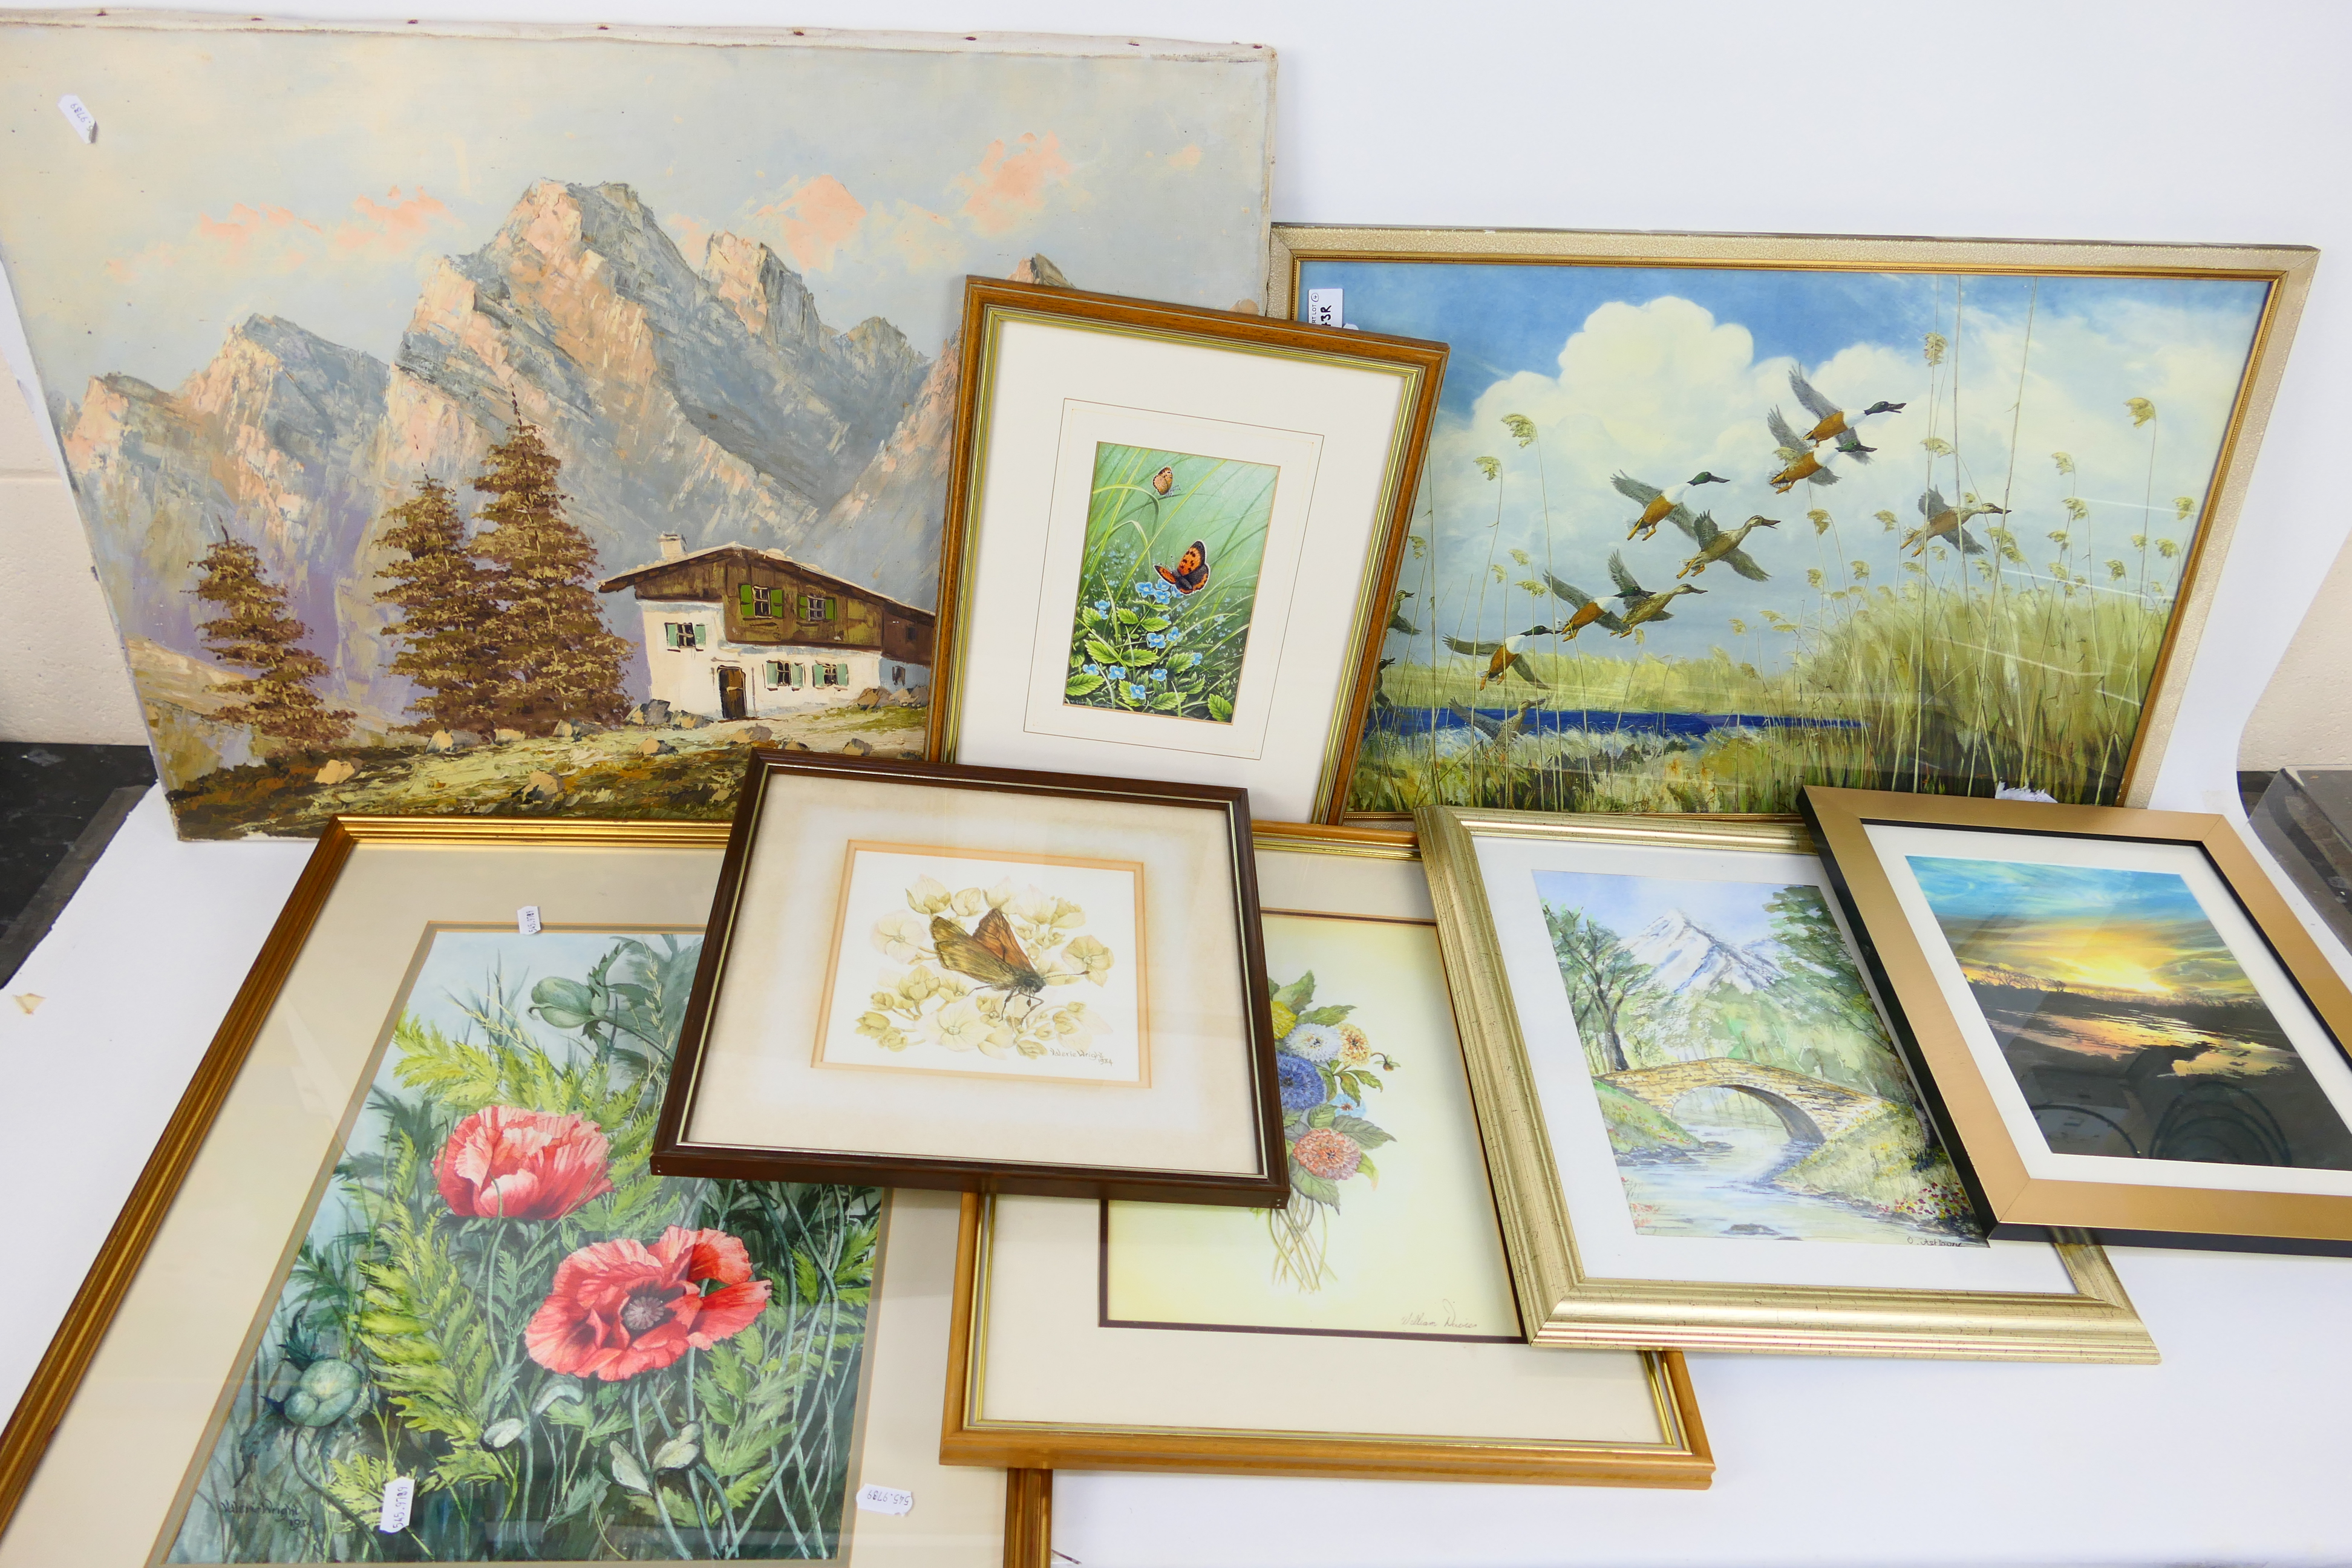 Lot to include framed watercolours, oil